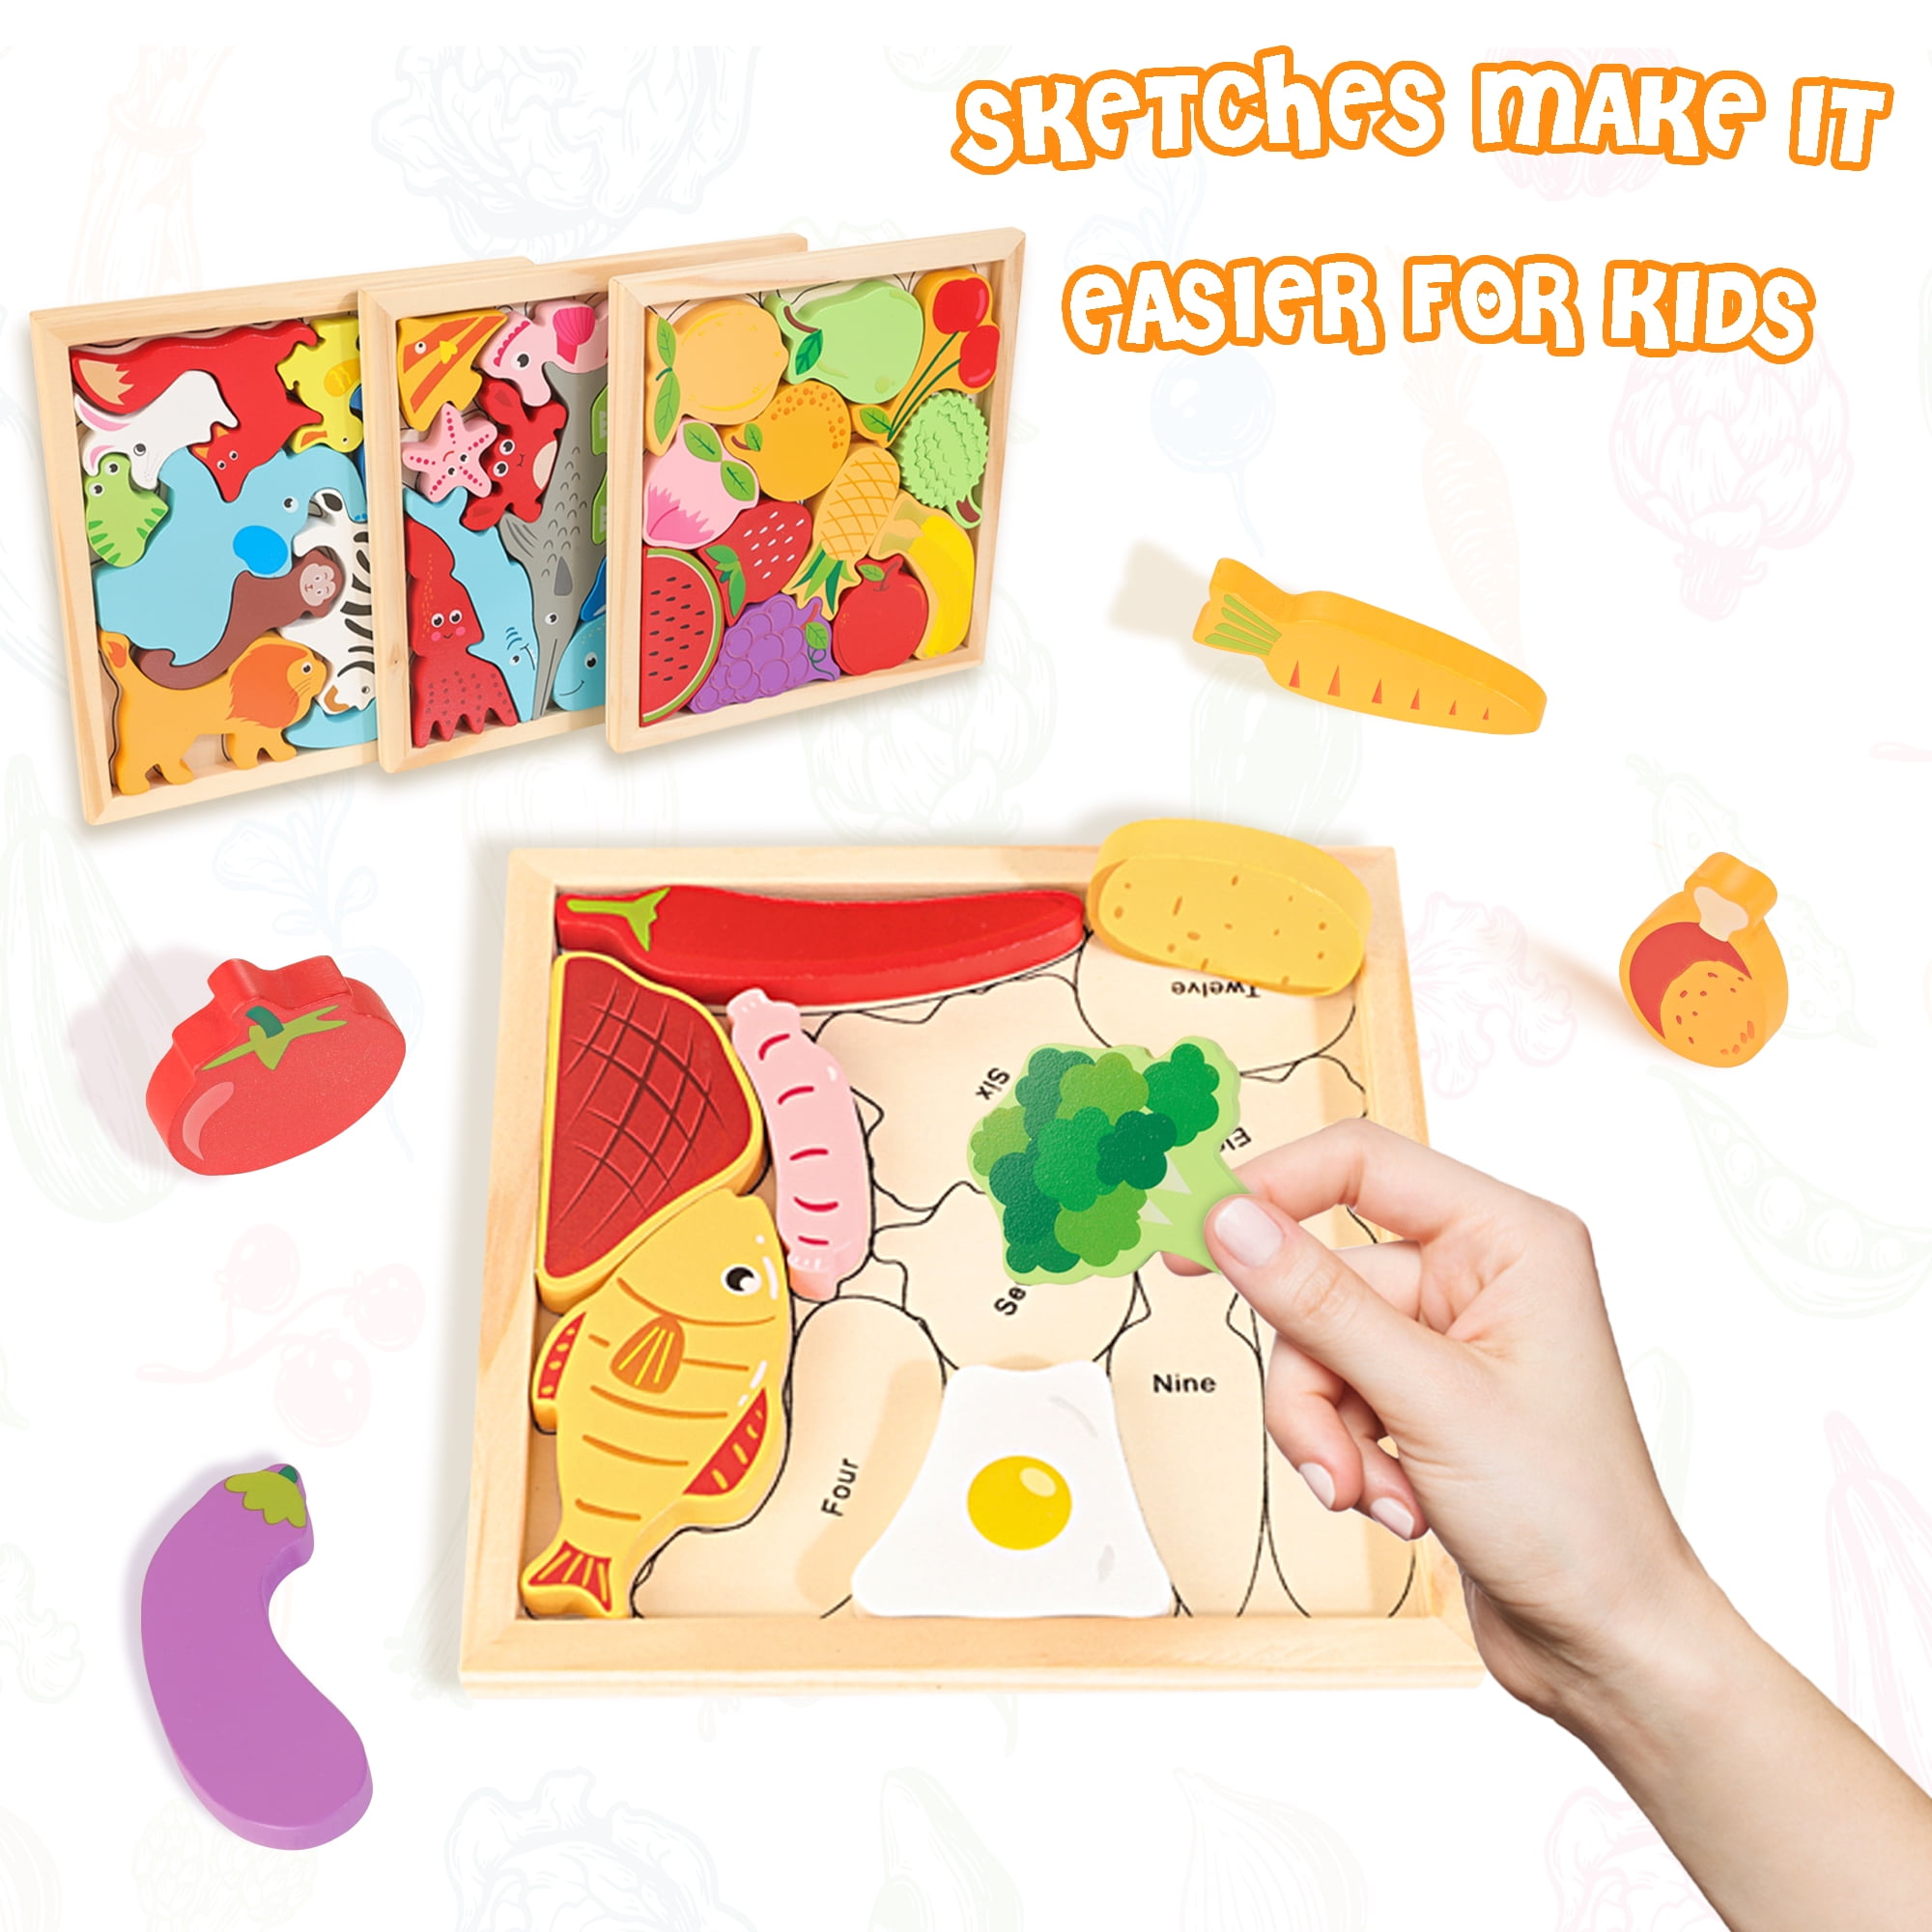 Cognisprings World Food Puzzles for Kids Ages 4-8 - Food Games - Jigsaw Puzzles - 64 Pcs Puzzle Games - Kids, Toddler Puzzles - Food Learning